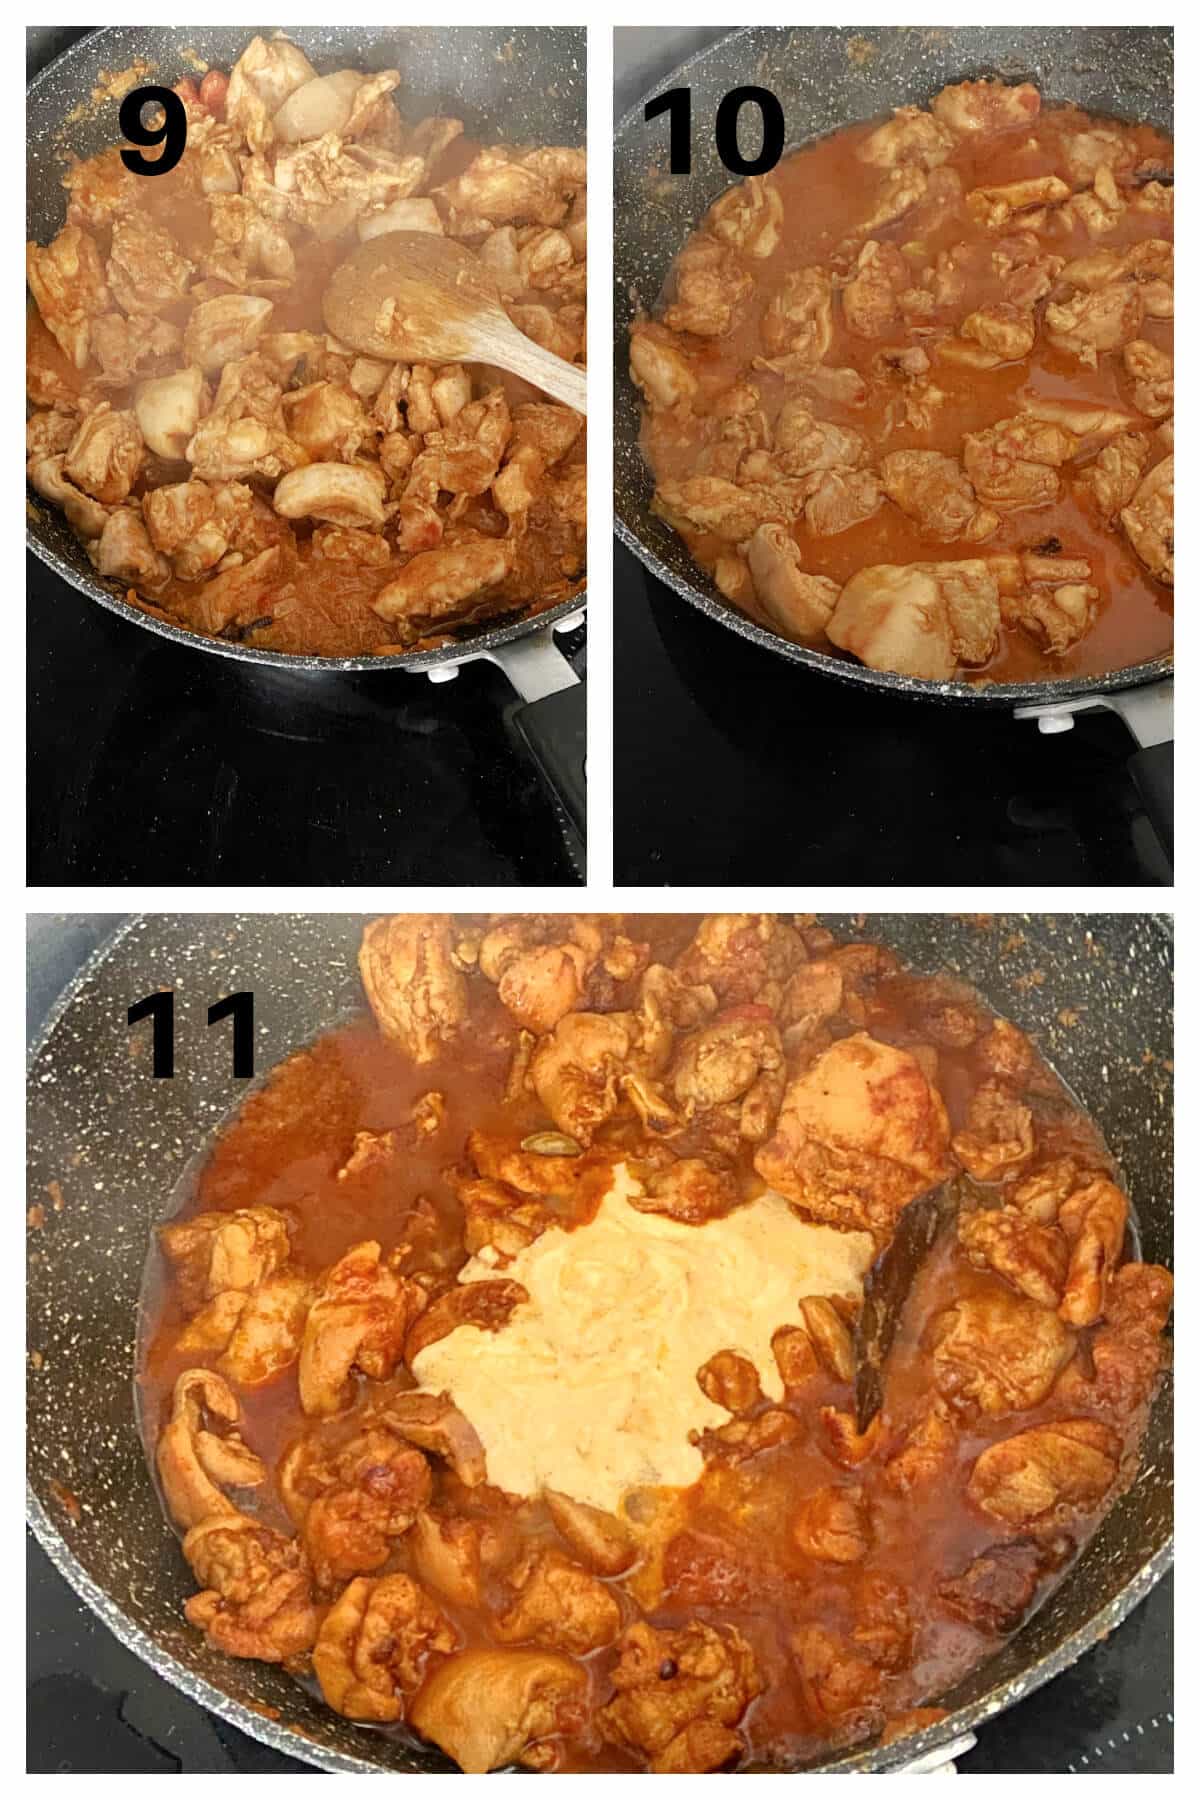 Collage of 3 photos to show how to make murgh masala.